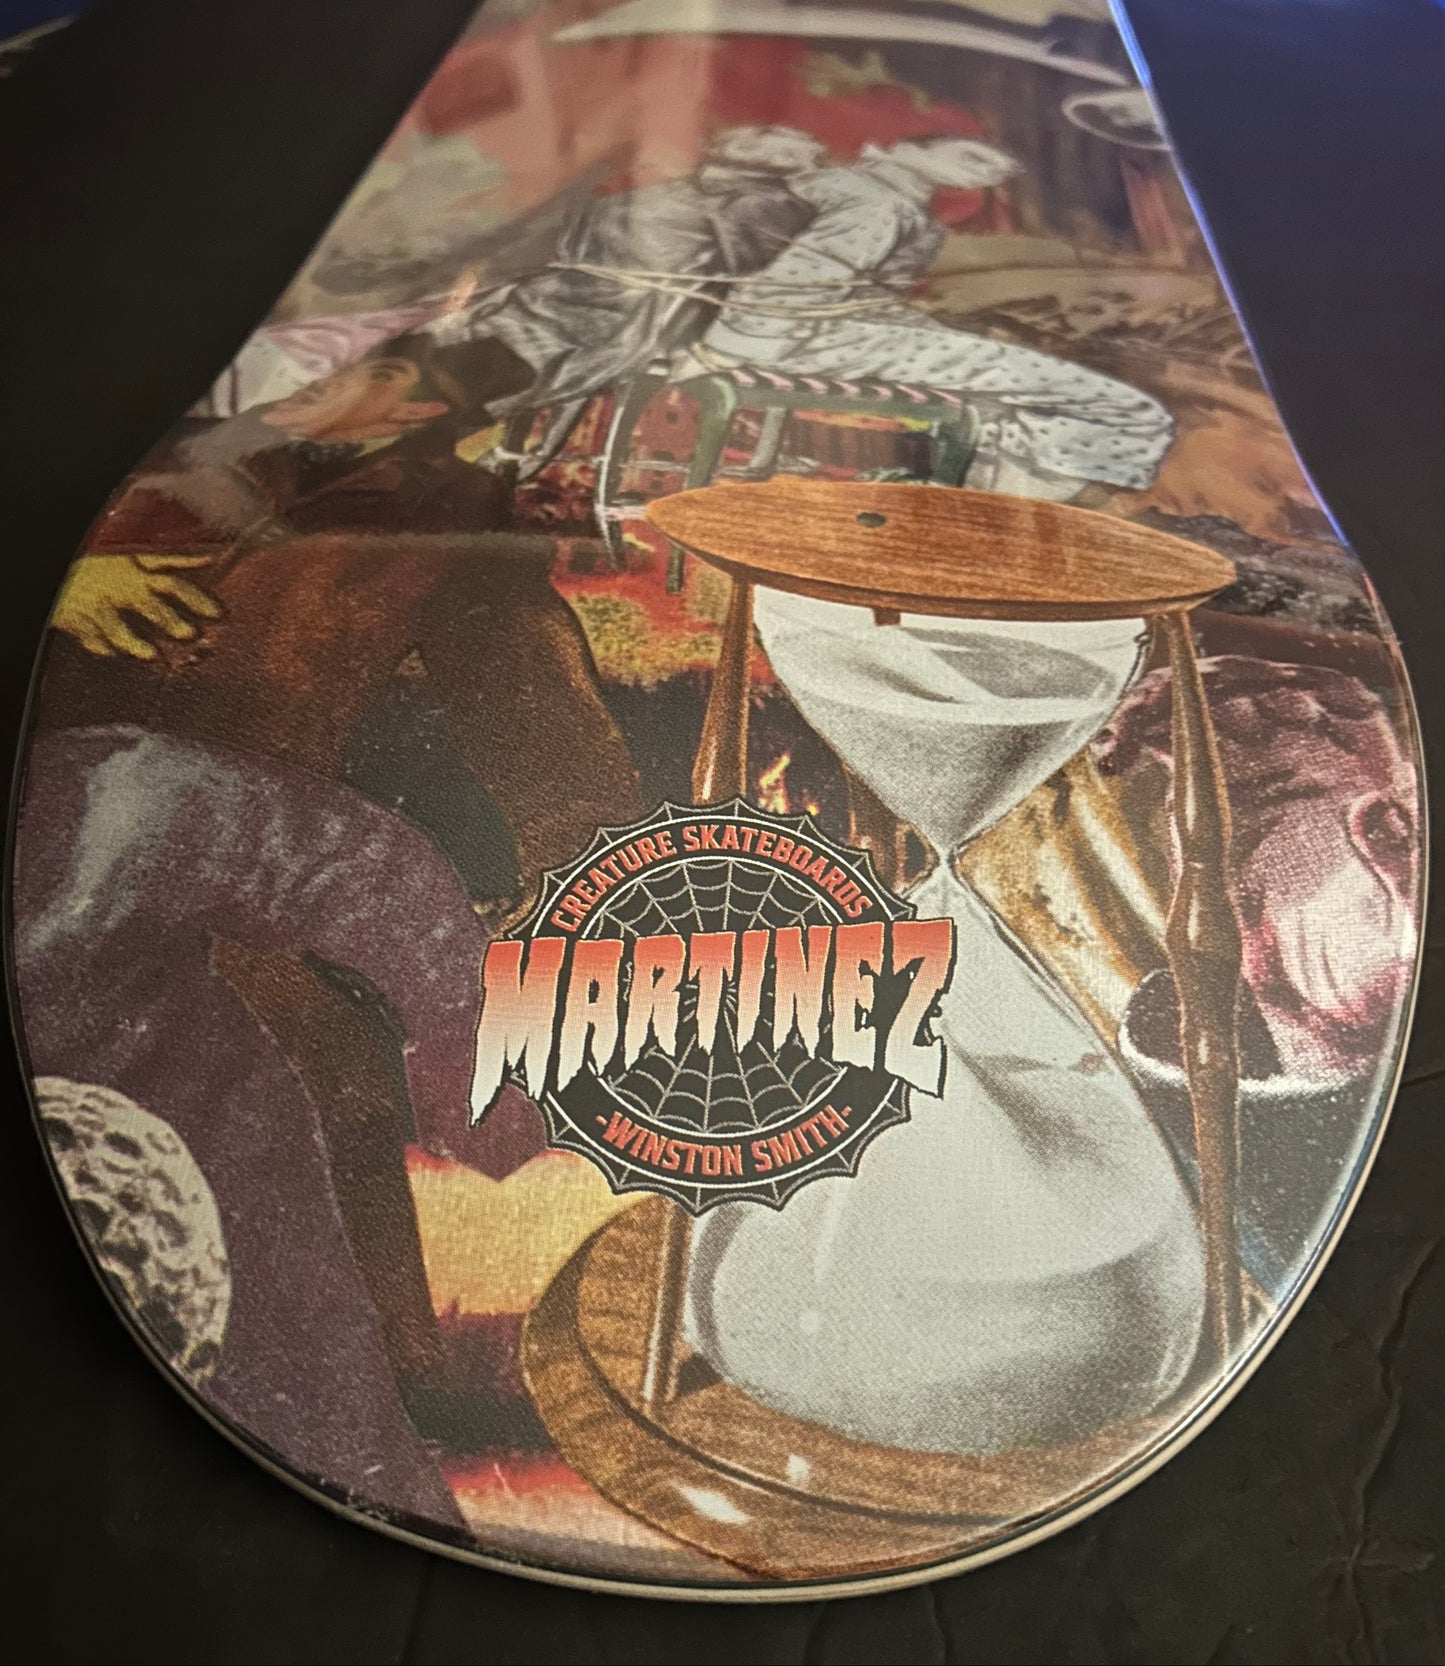 Winston Smith / Creature Signed Skateboards LIMITED